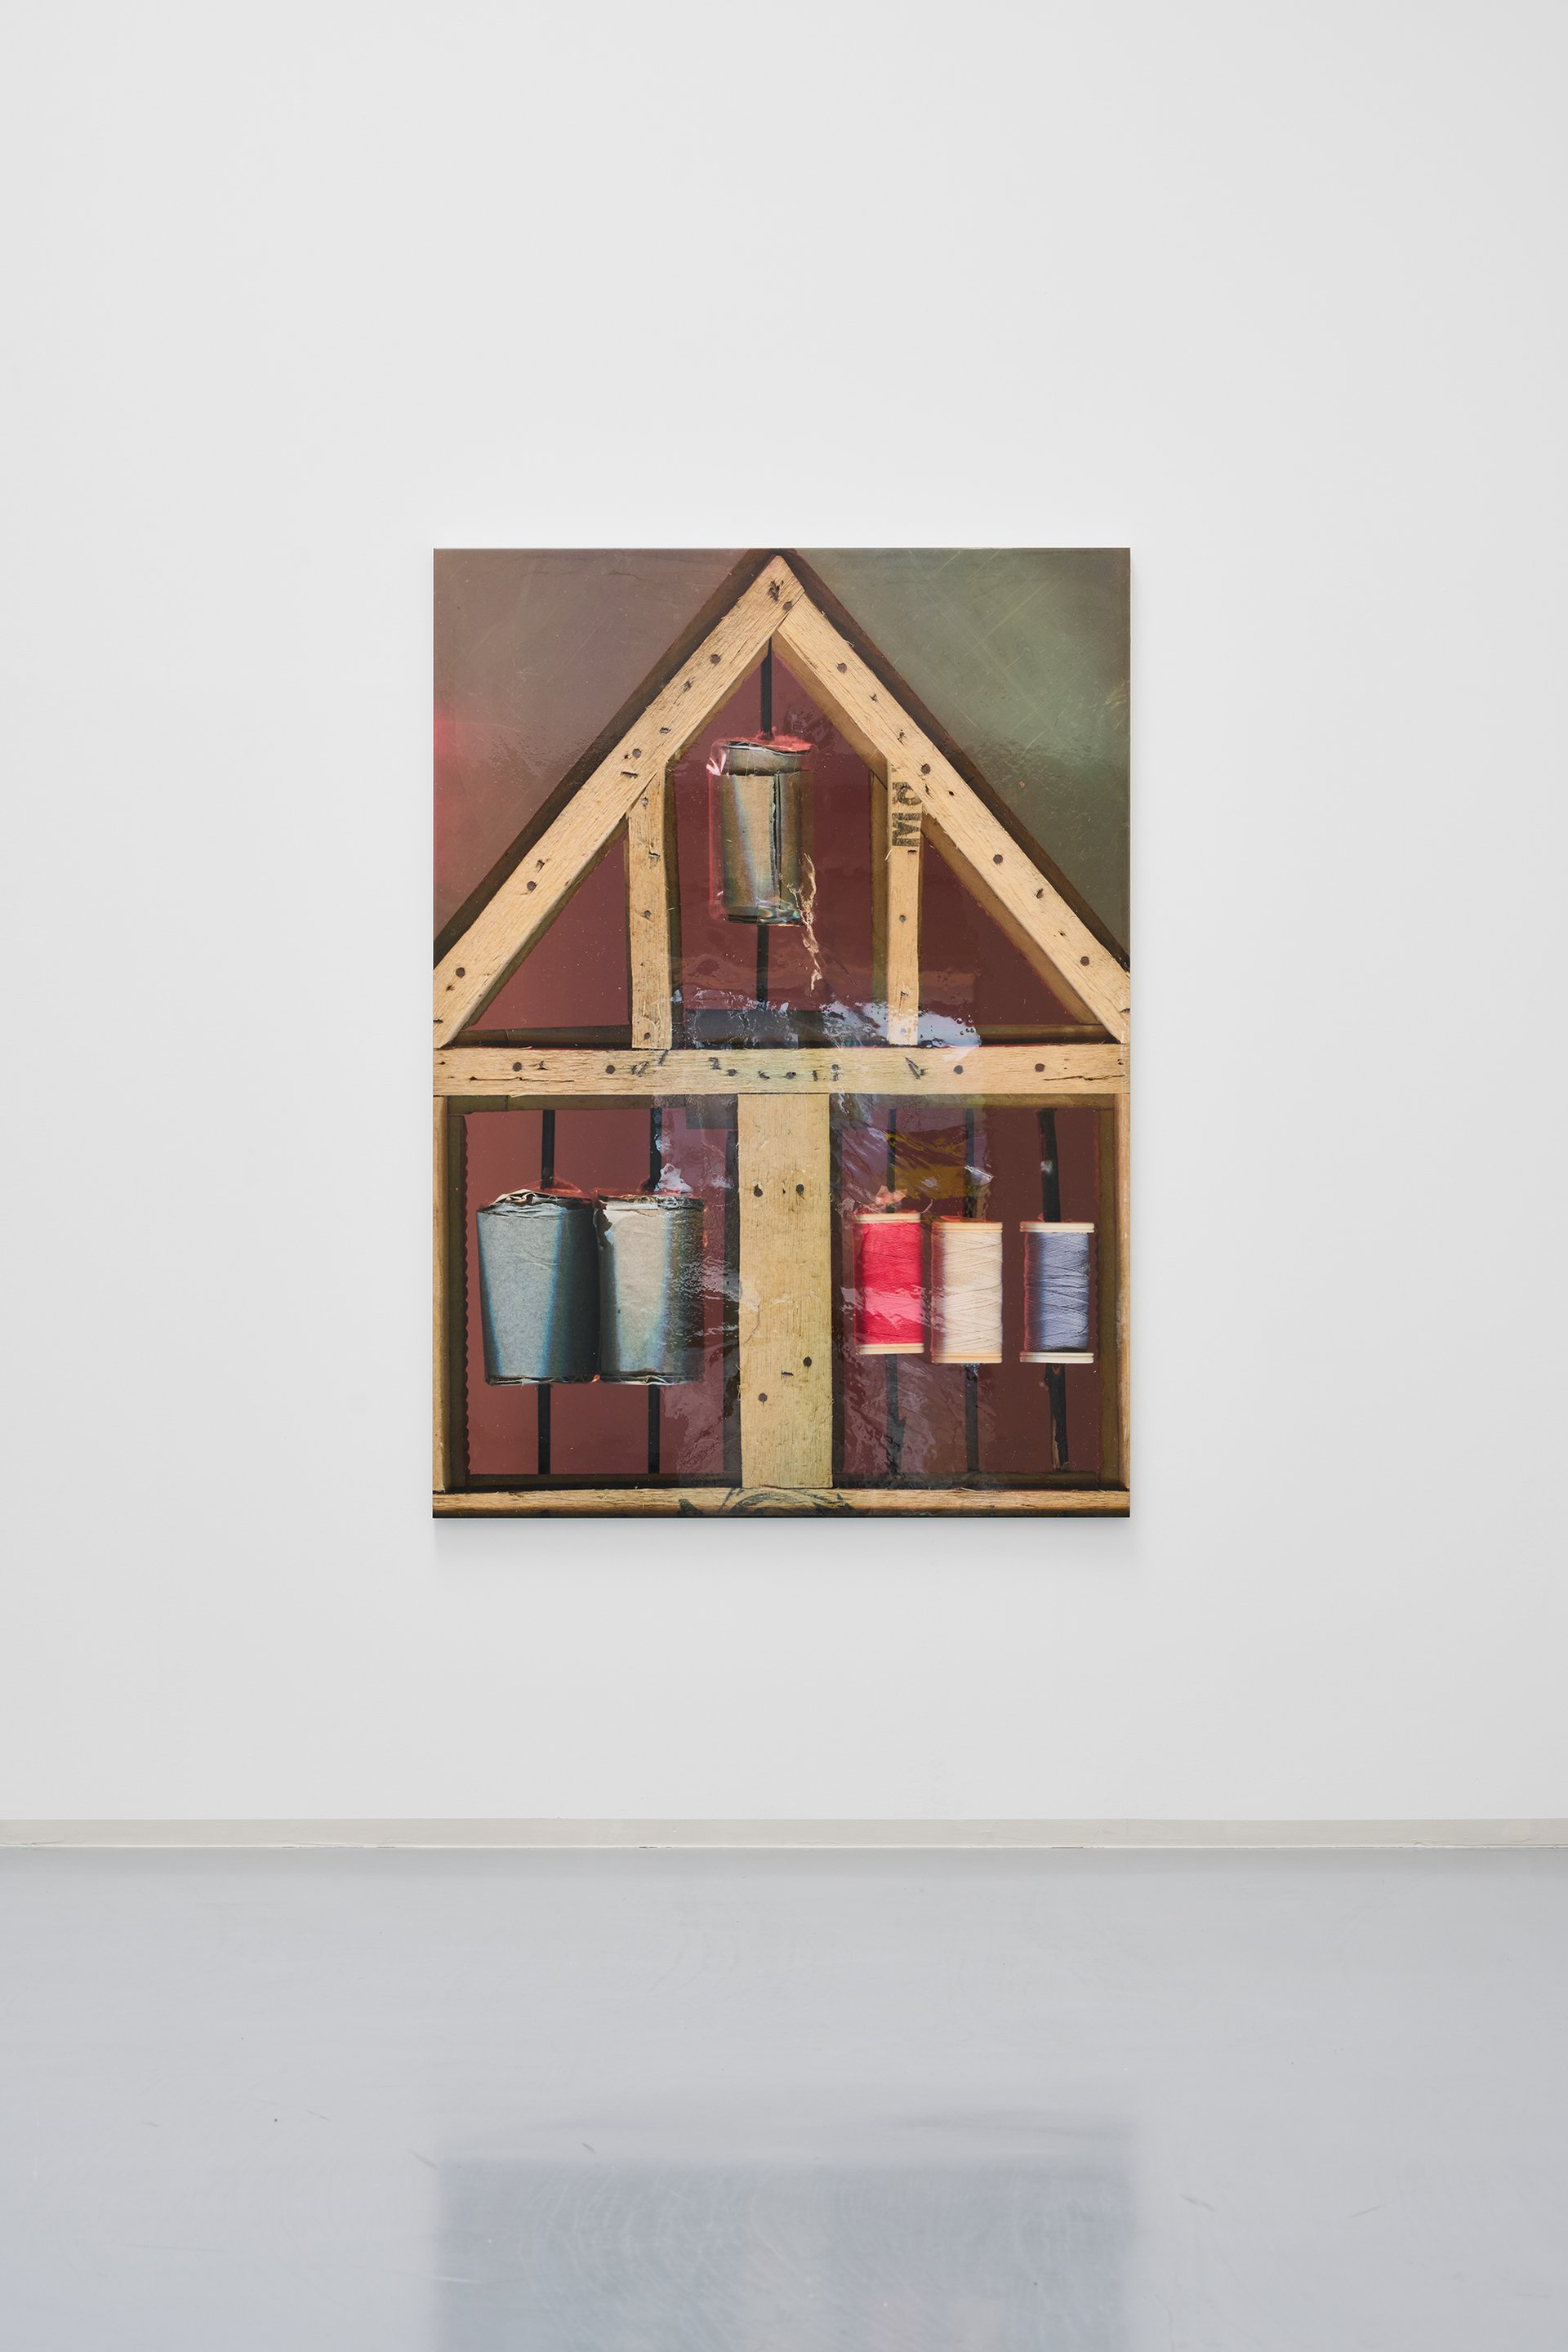 Lucie Stahl, House of Prayer, installation view, Lucie Stahl: Seven Sisters, Bonner Kunstverein, 2022. Courtesy the artist, Cabinet Gallery, London, dépendance, Brussels, Fitzpatrick Gallery, Paris and Los Angeles, and Galerie Meyer Kainer, Vienna. Photo: Mareike Tocha.